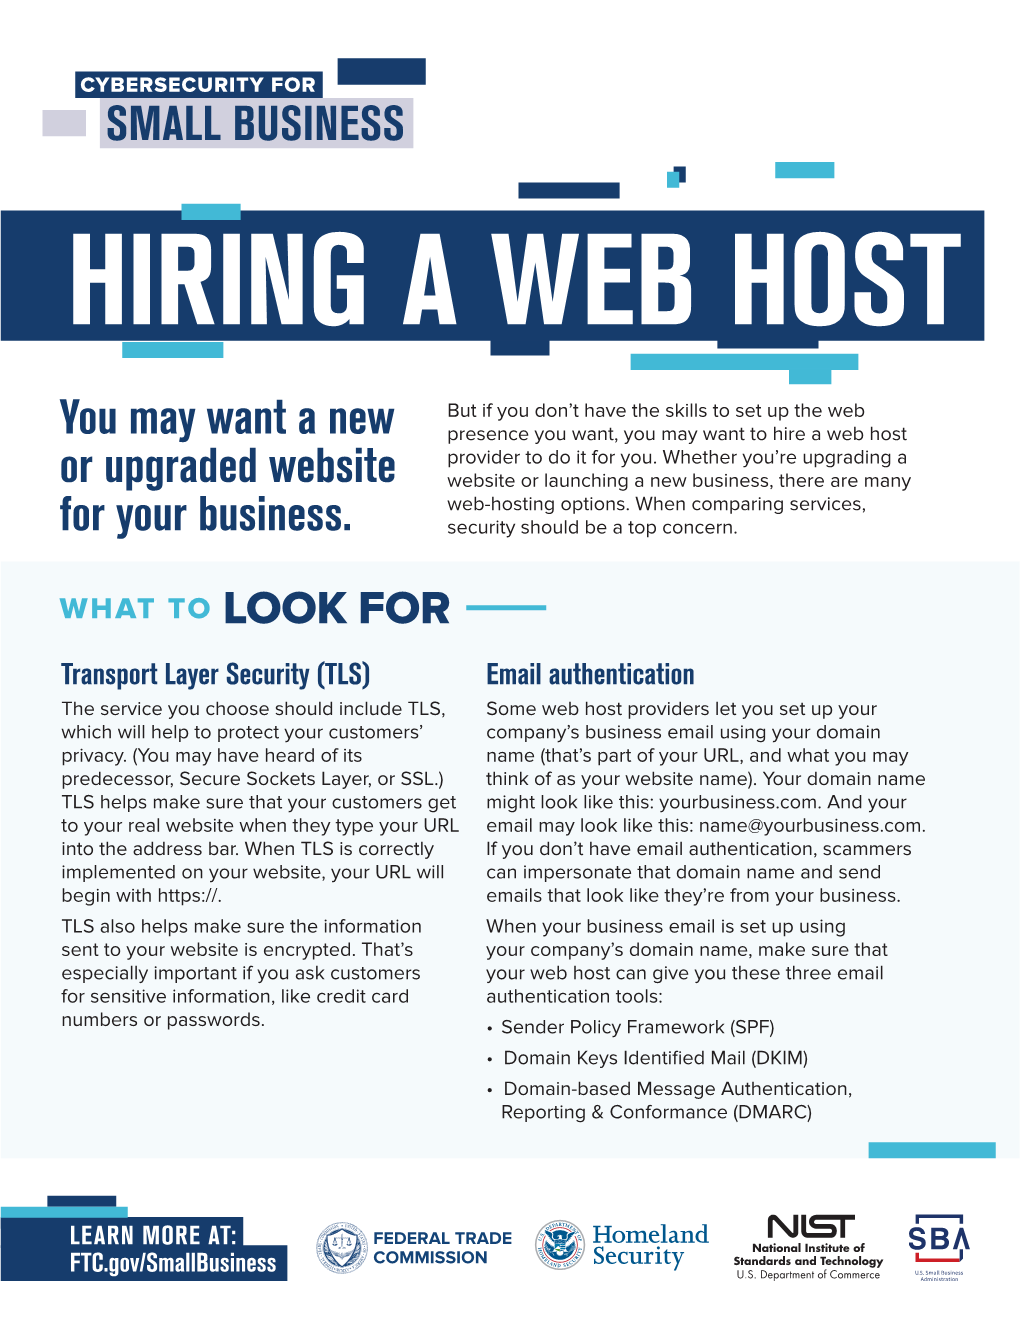 Cybersecurity for Small Business: Hiring a Web Host